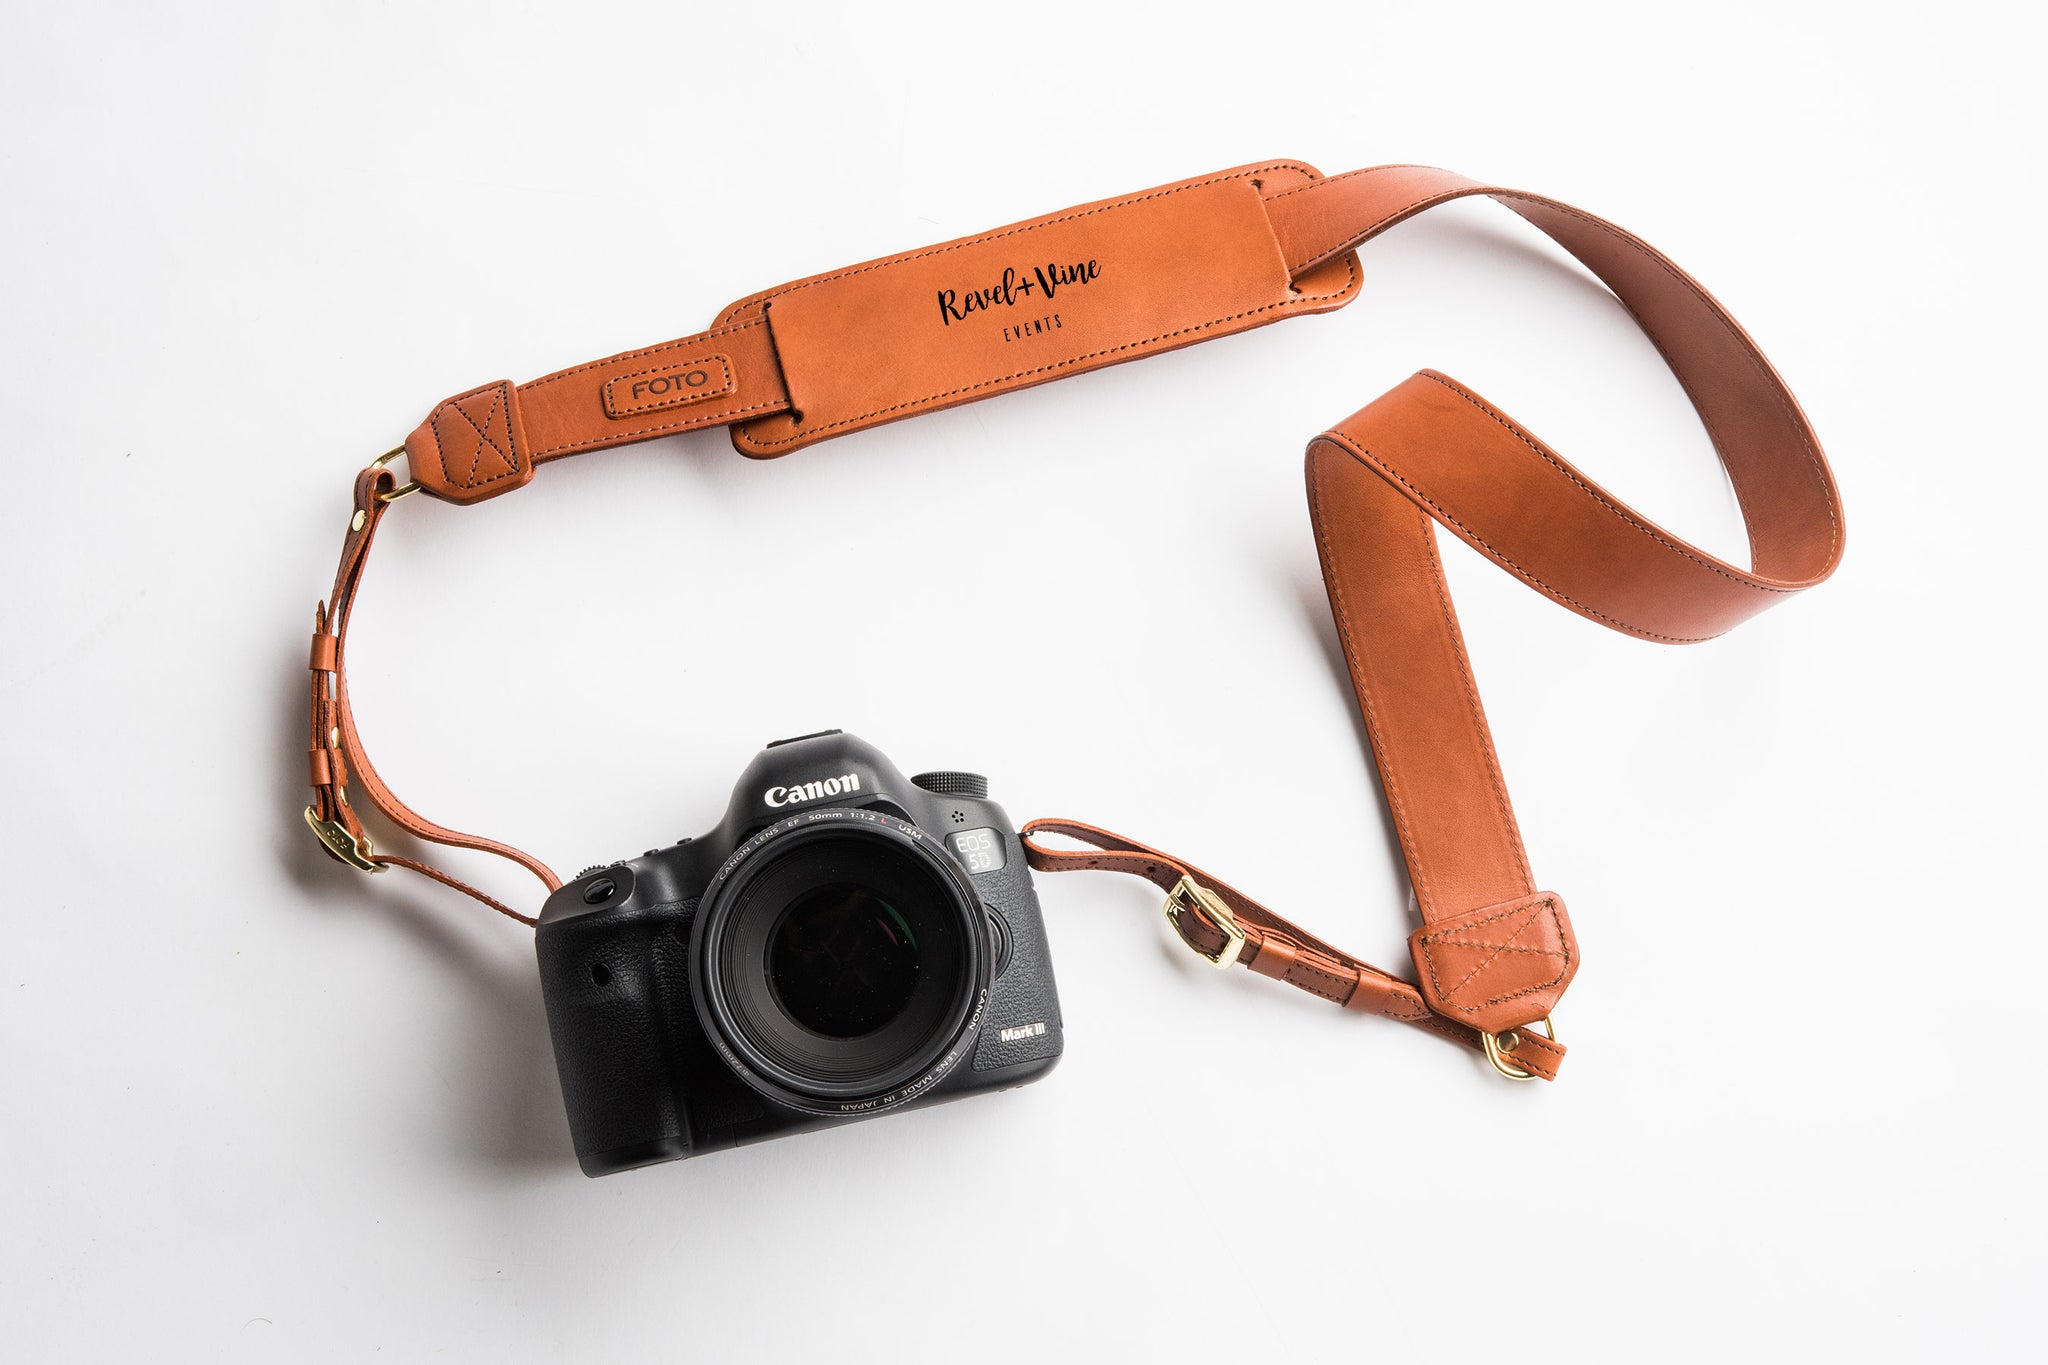 Learn how to design your own logo and visual brand for your new photography business with these simple tips from Fotostrap